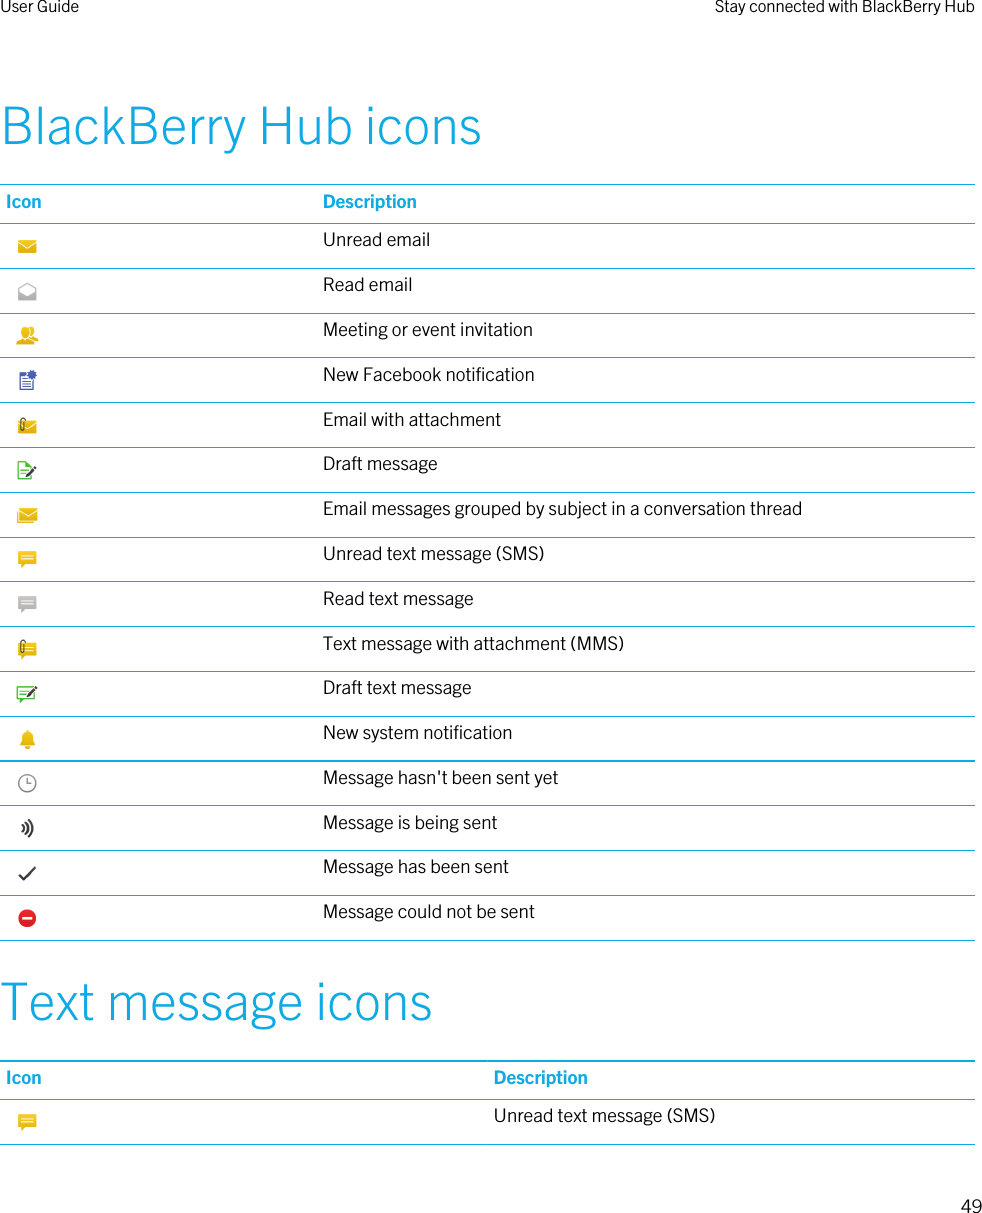 BlackBerry Hub iconsIcon Description Unread email Read email Meeting or event invitation New Facebook notification Email with attachment Draft message Email messages grouped by subject in a conversation thread Unread text message (SMS) Read text message Text message with attachment (MMS) Draft text message New system notification Message hasn&apos;t been sent yet Message is being sent Message has been sent Message could not be sentText message iconsIcon Description Unread text message (SMS)User Guide Stay connected with BlackBerry Hub49 